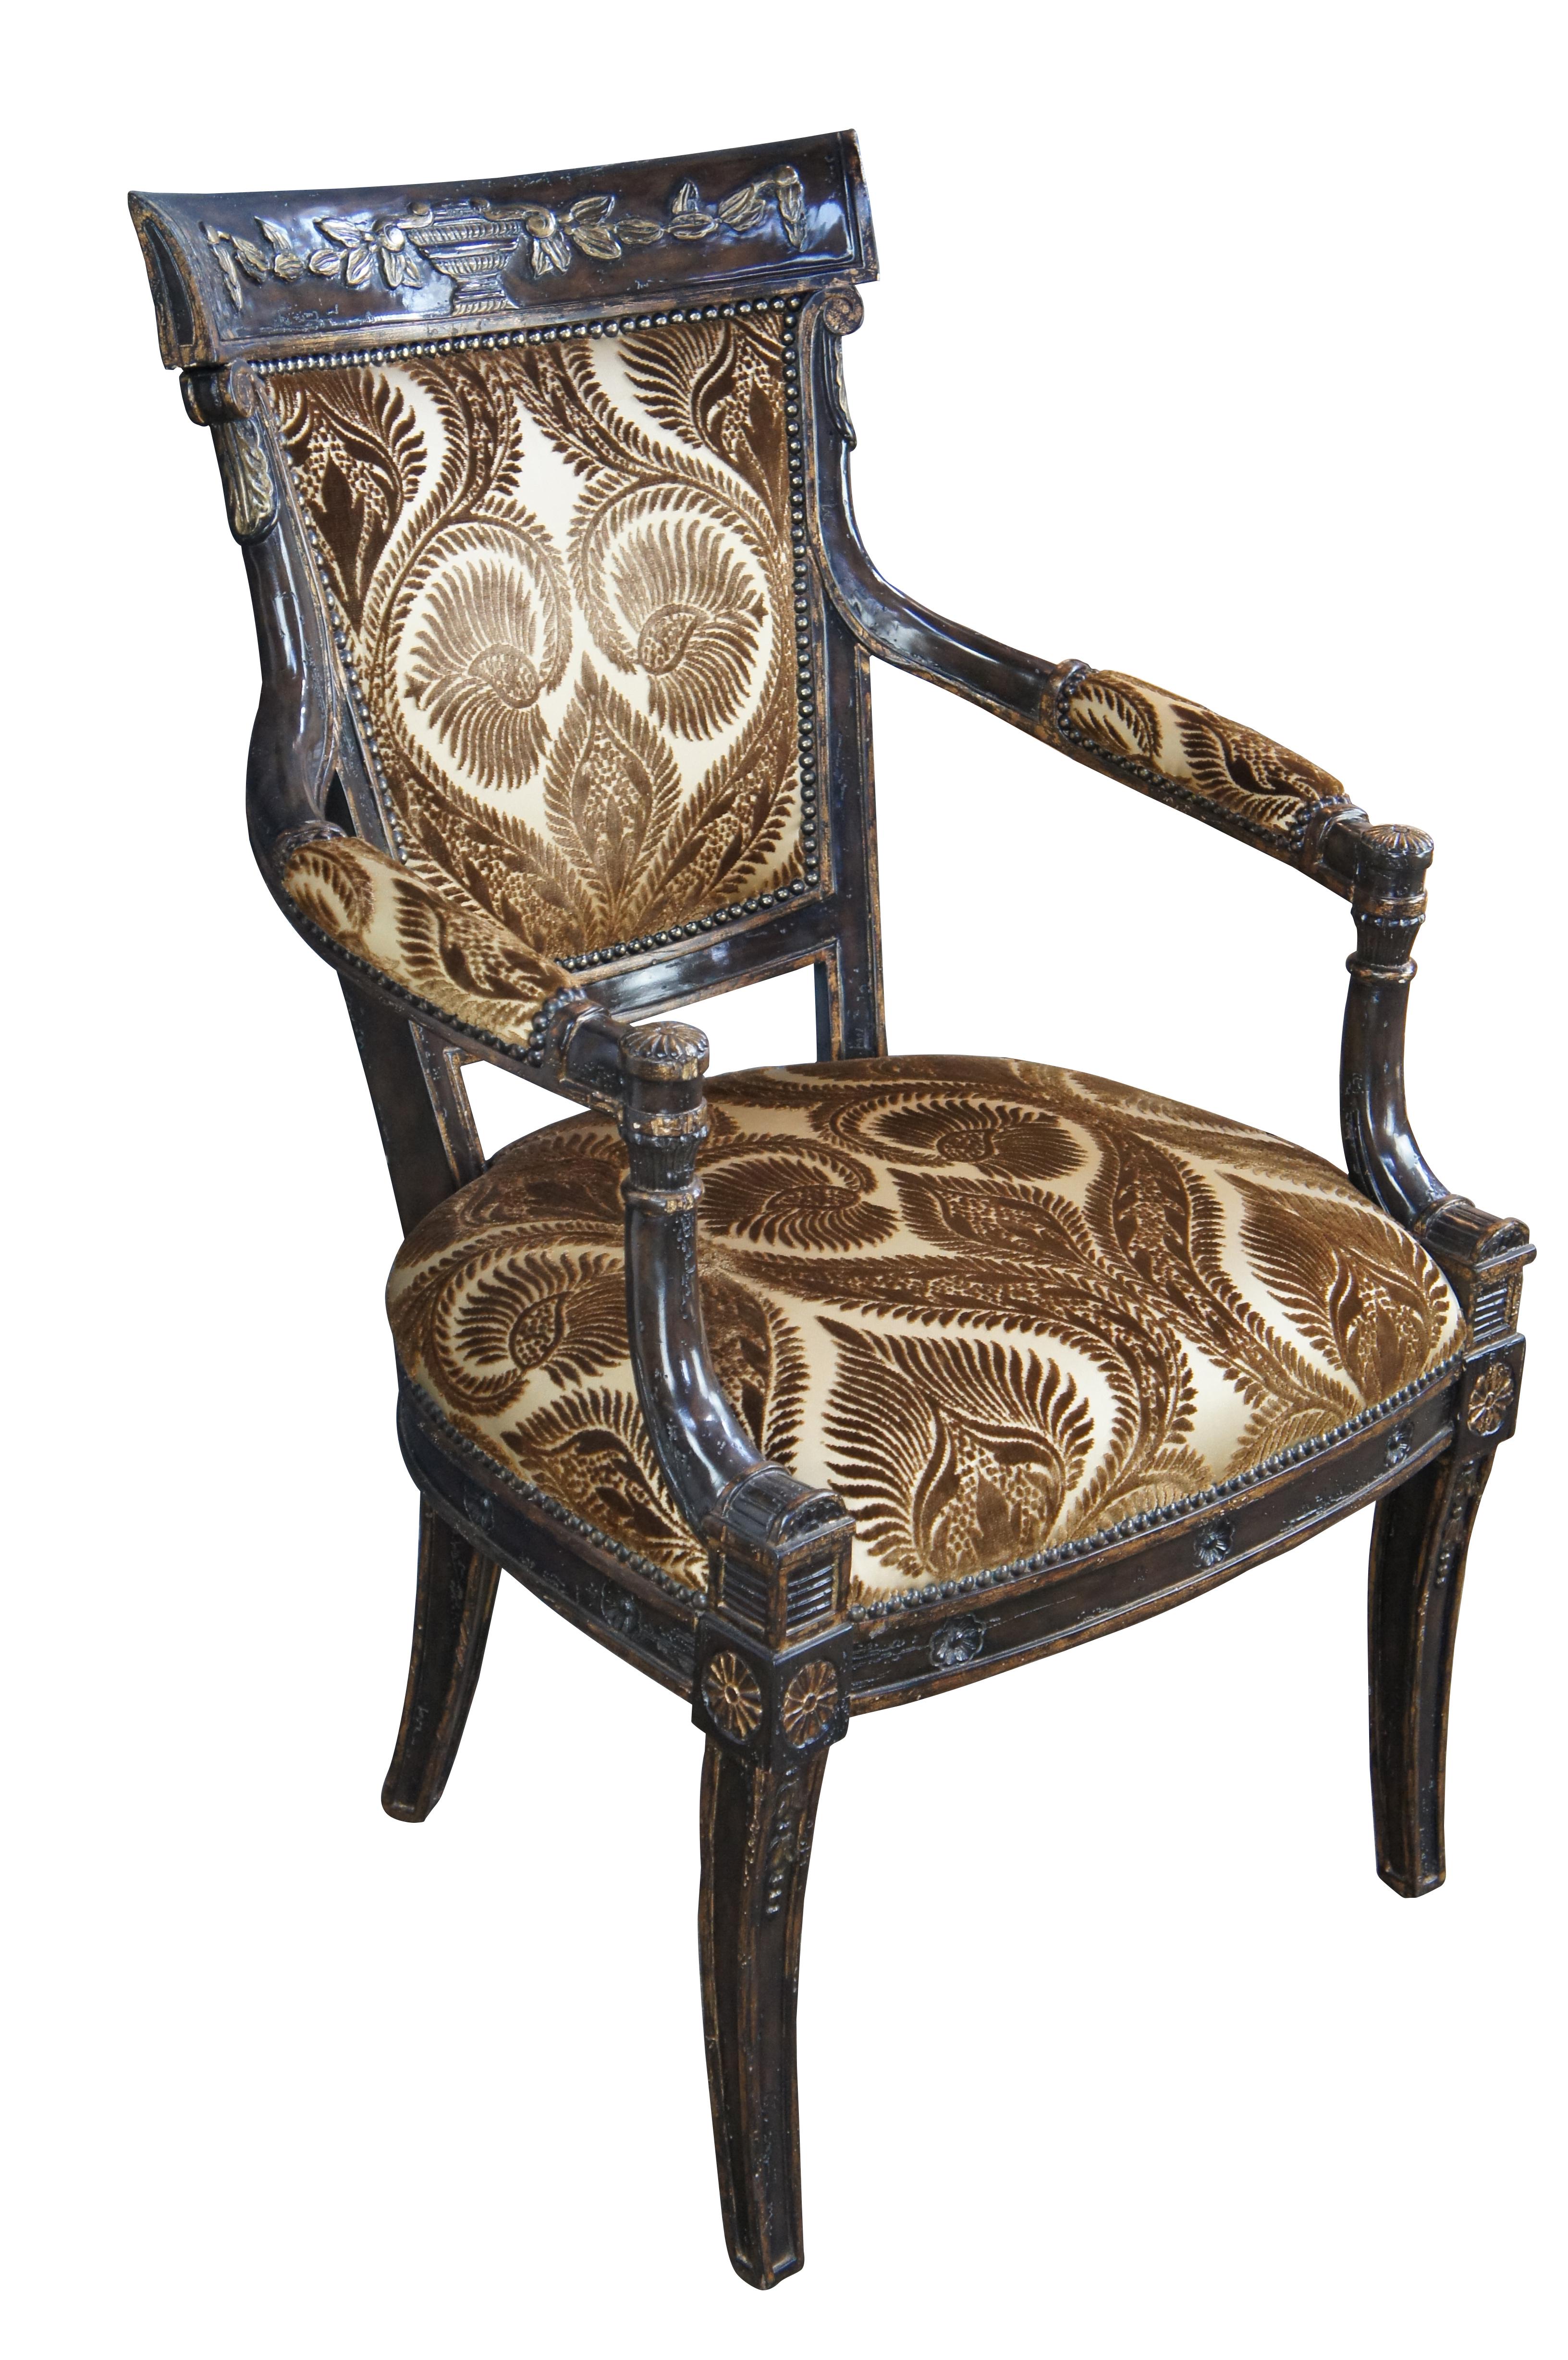 French Empire style arm chair by Marge Carson. Features a mahogany finished and distressed frame with an intriguing brown / gold foliate upholstered seat and back. Crest rail is contoured with a carved Grecian urn at the center surrounded by foliate